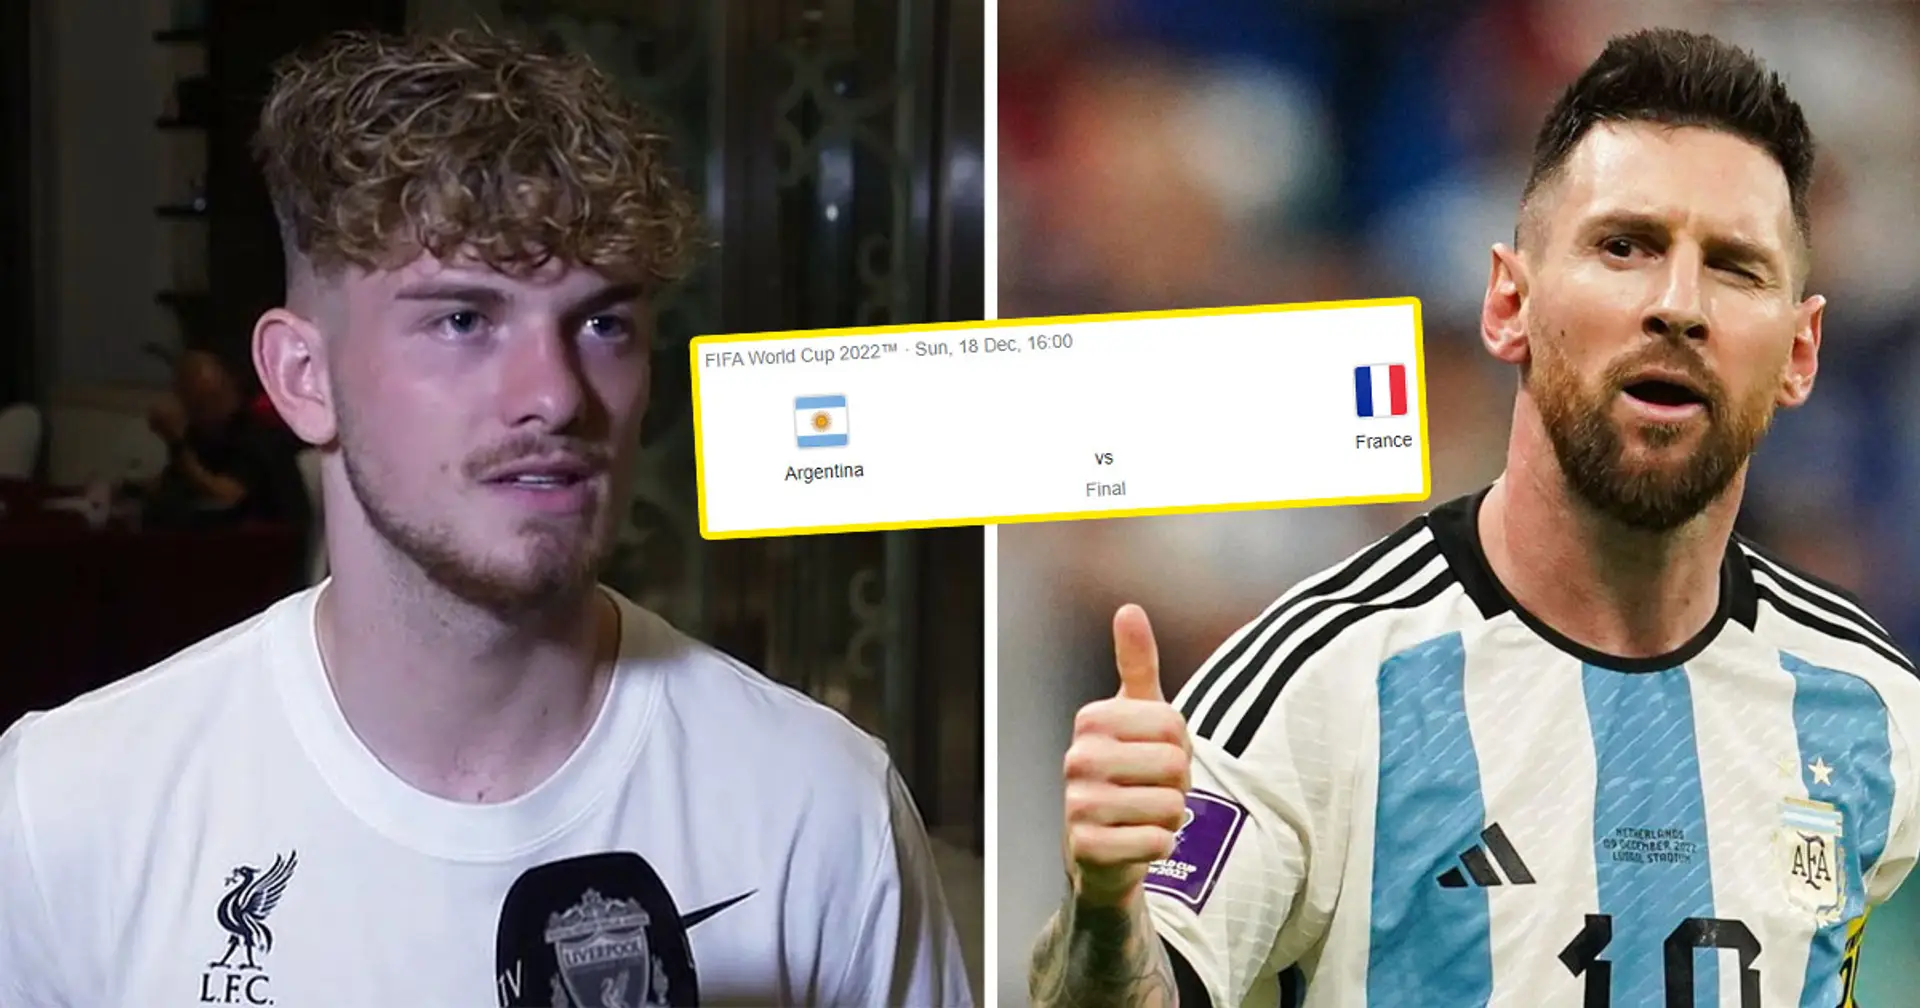 Elliott will be rooting against Messi in World Cup final despite calling him GOAT - here's why